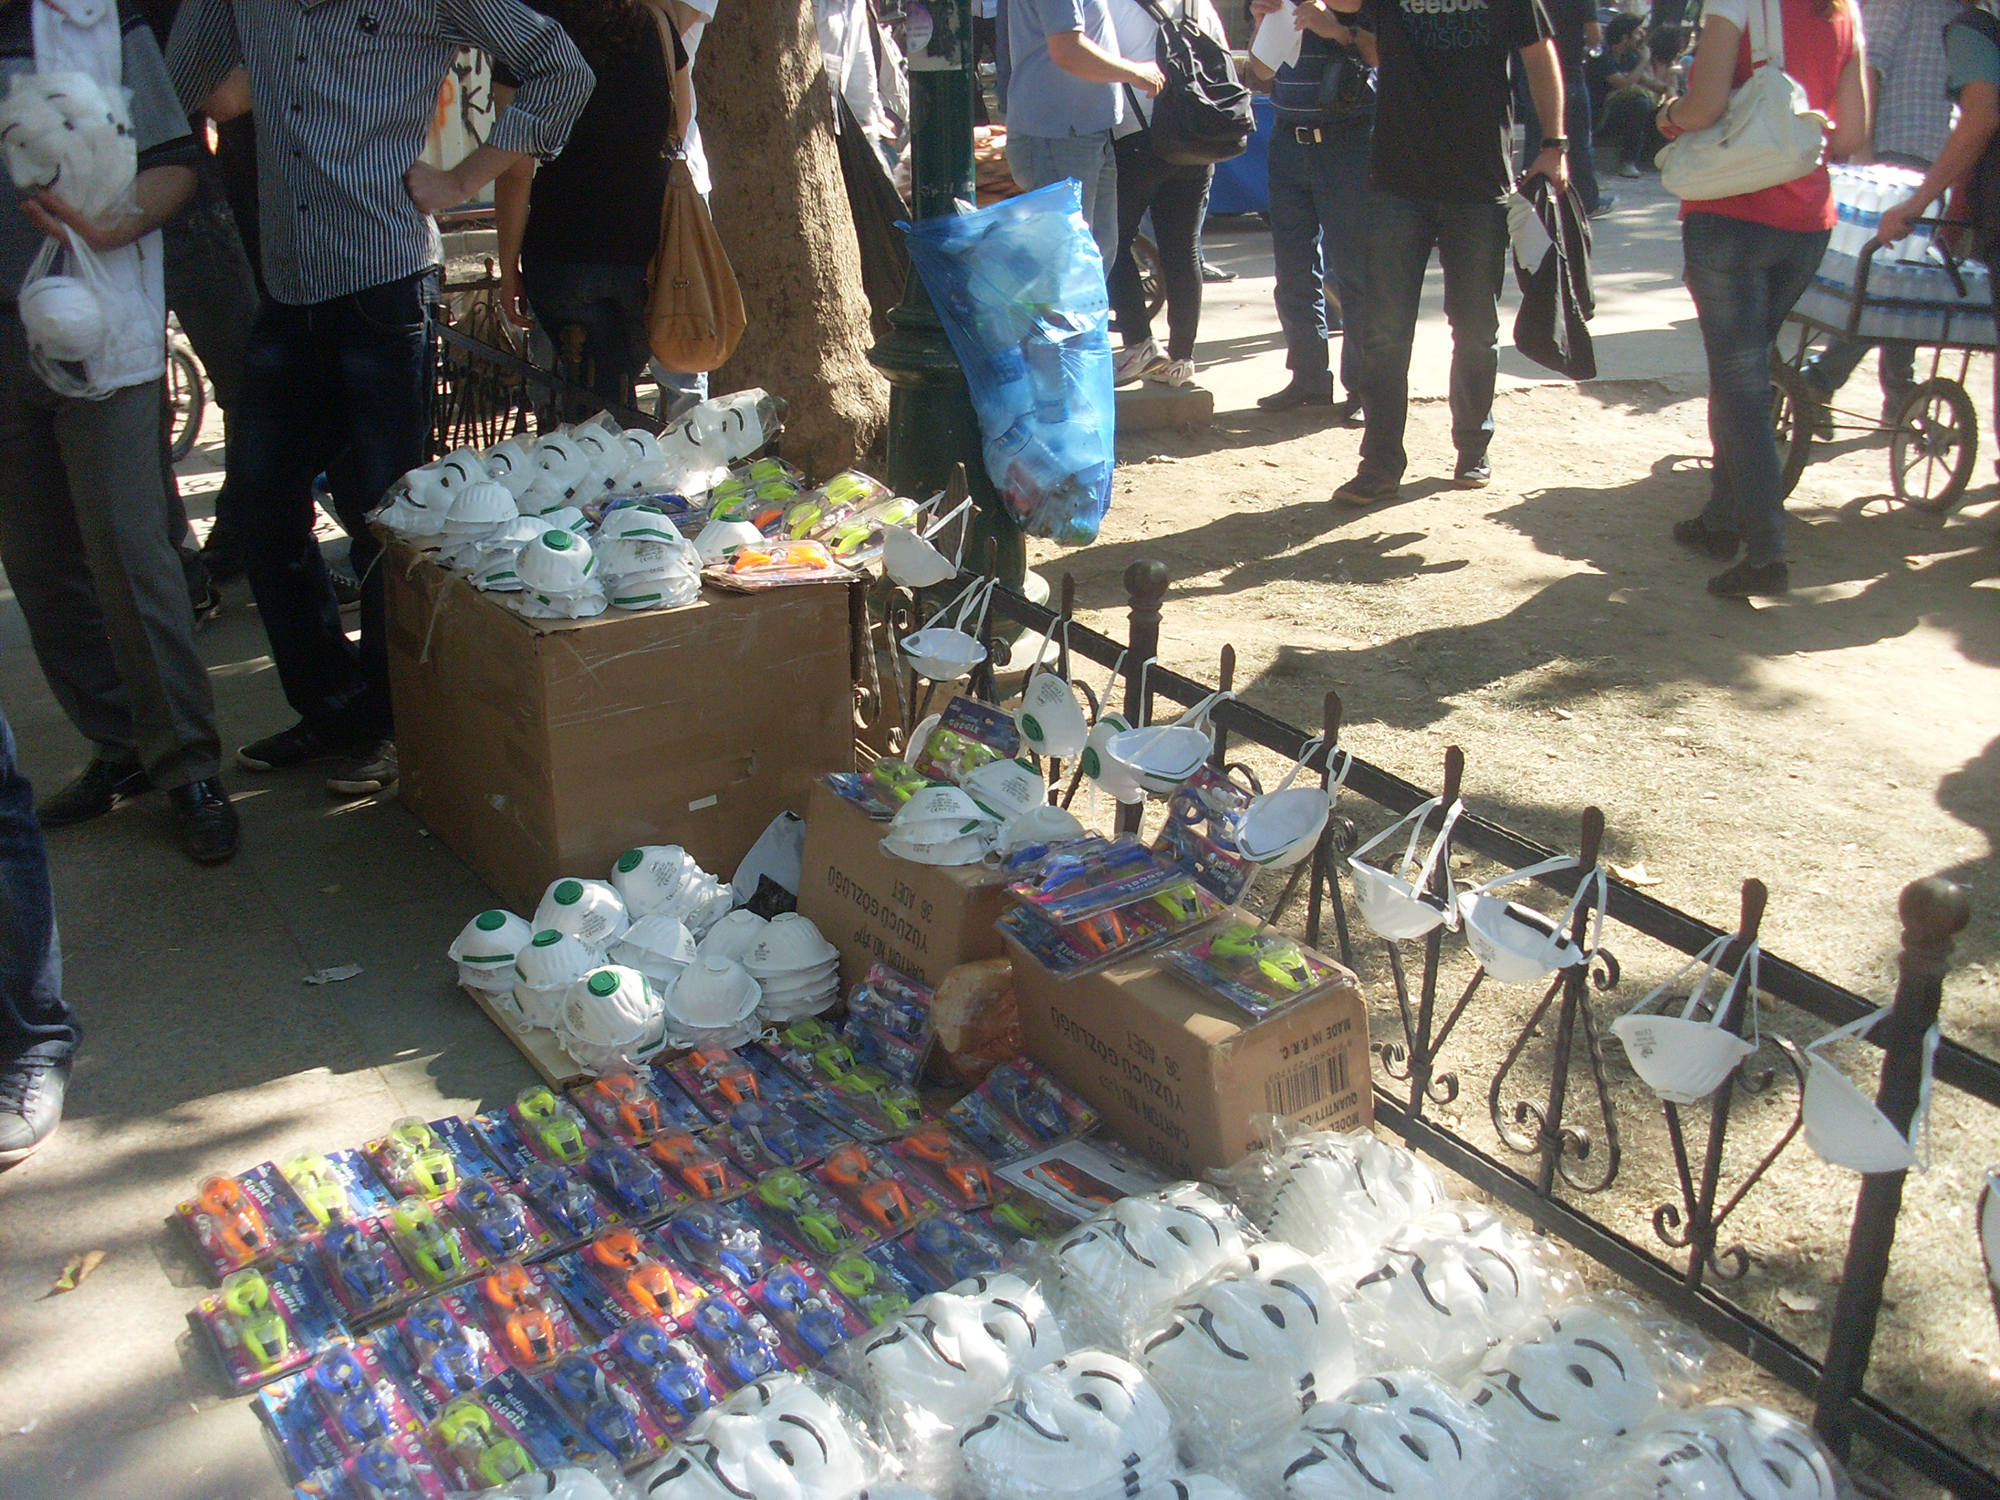 Seller of gas masks and goggles at Taksim Gezi Park on 4th June 2013. Source: VikiPicture (Wikimedia Commons CC BY-SA)